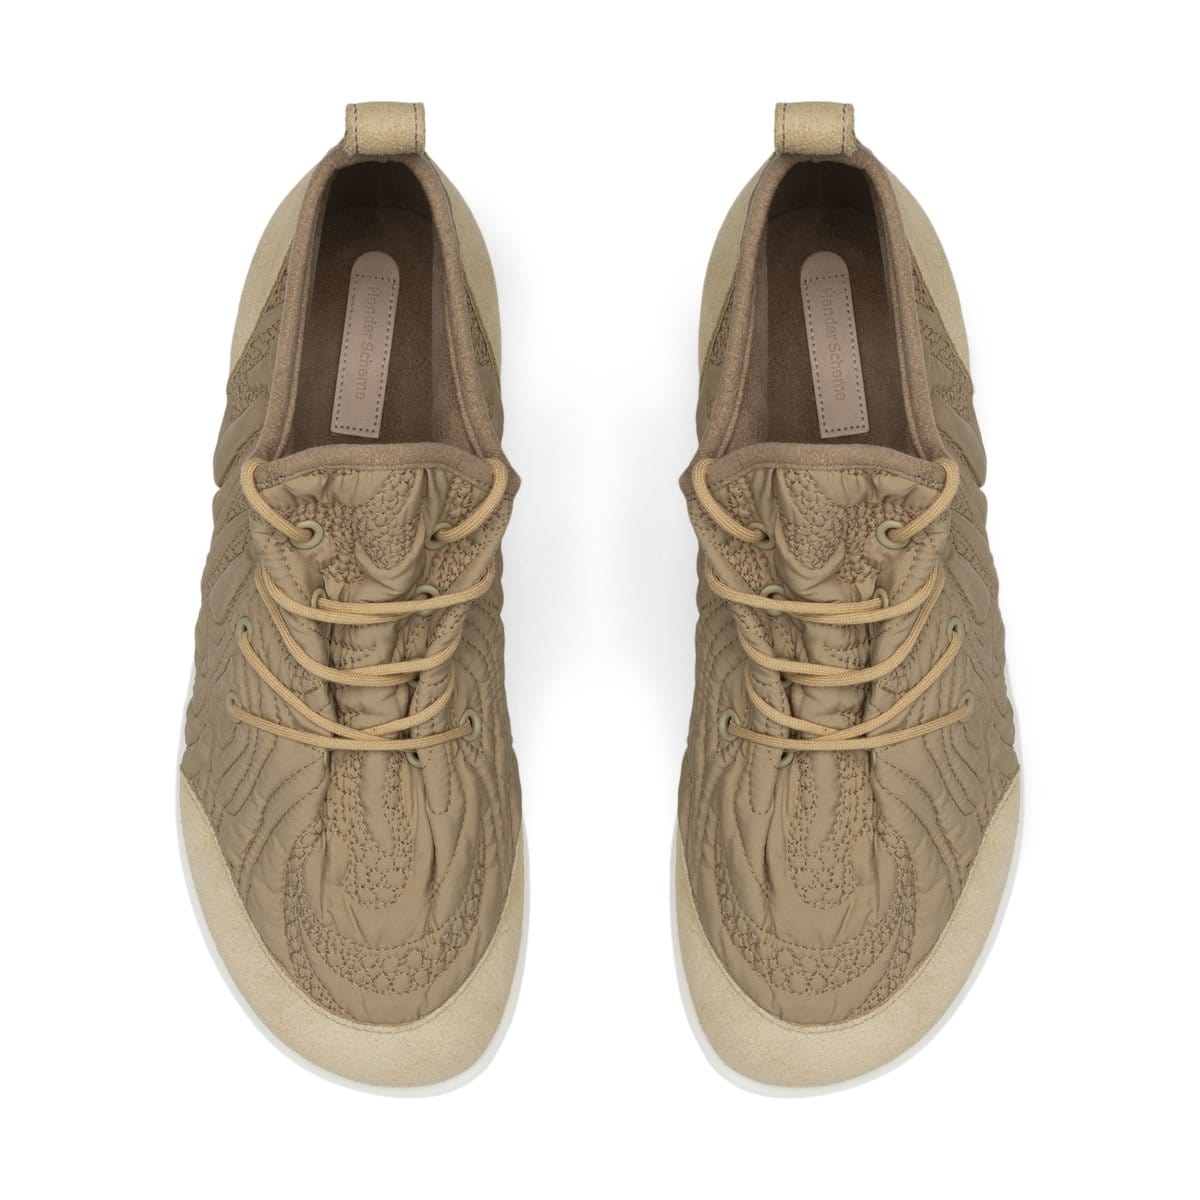 Hender Scheme tow-top Boots QUILTING LACE